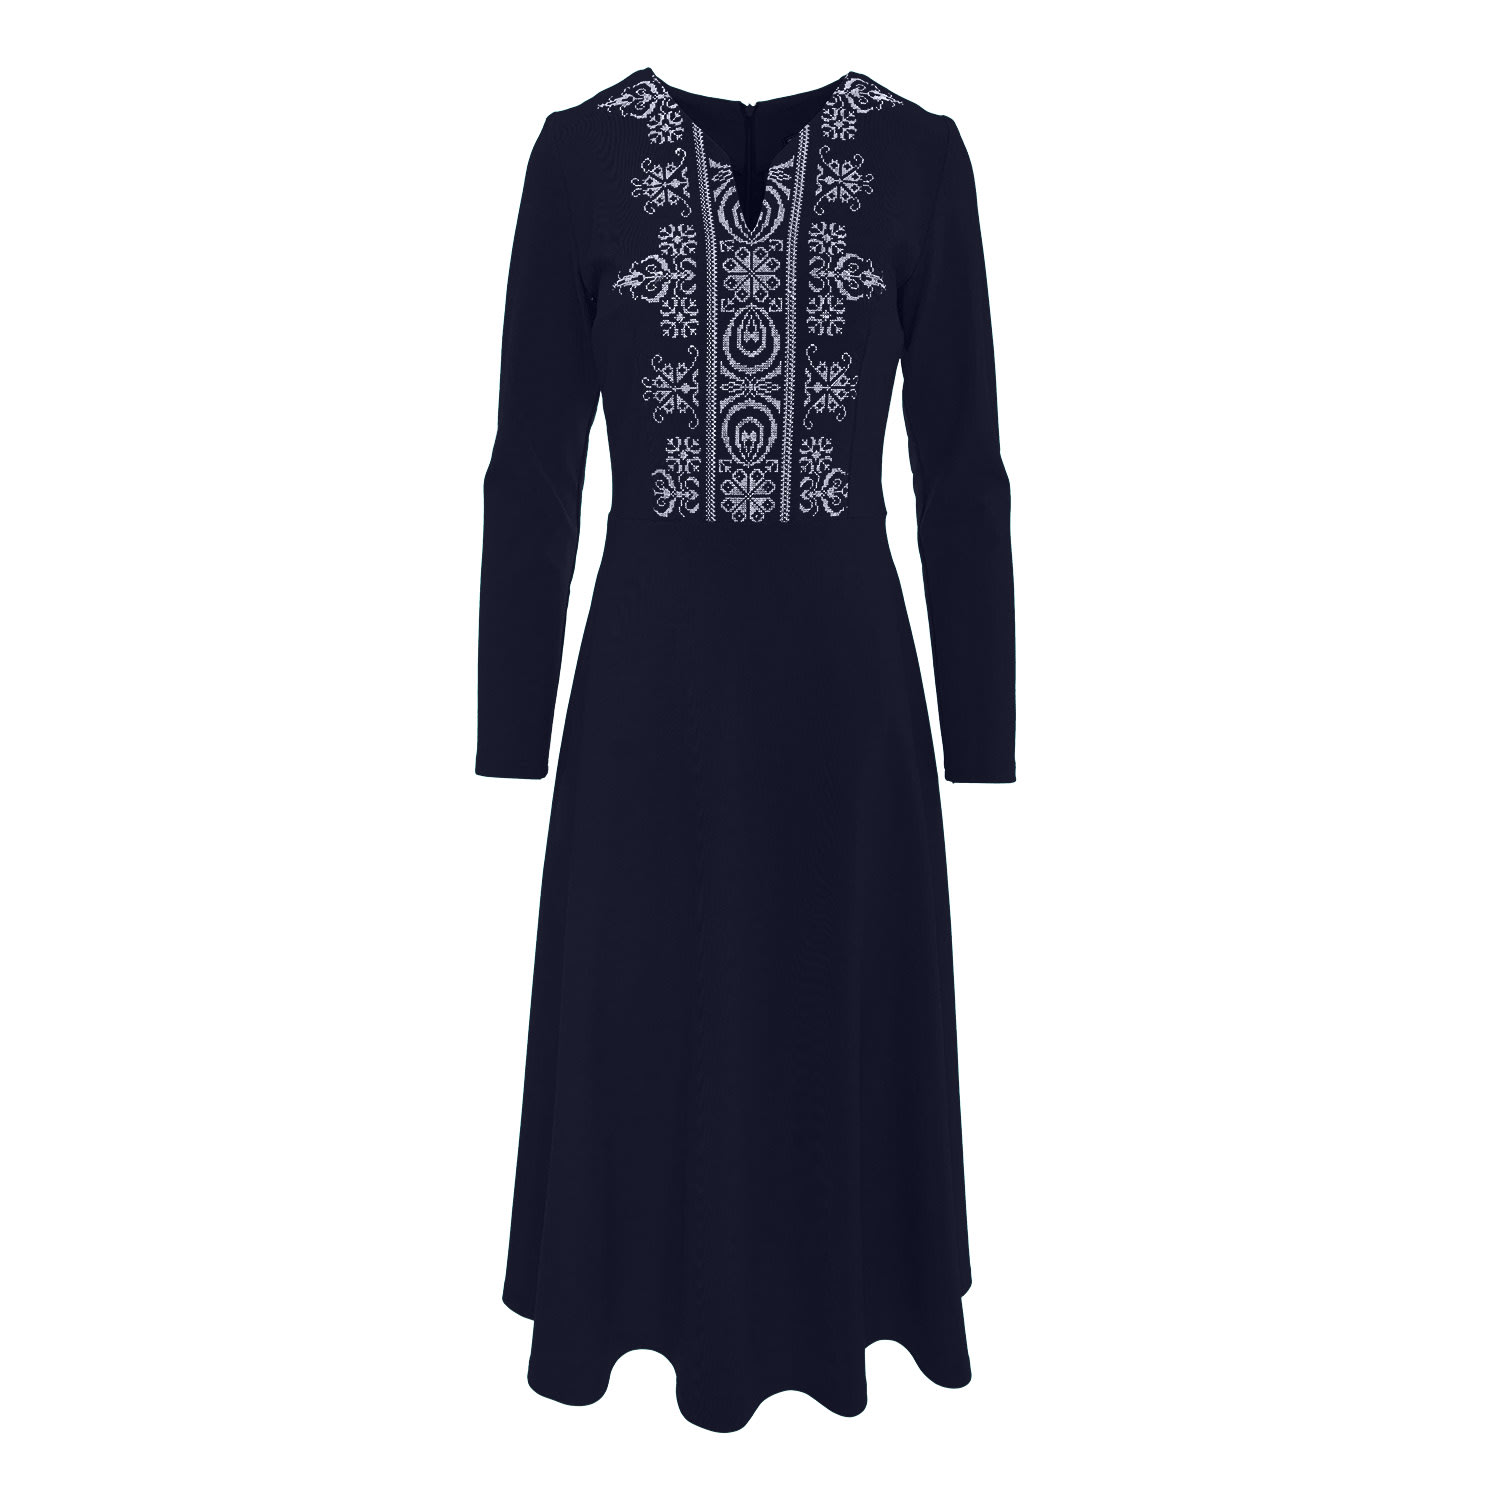 Women’s Midi Dress In Navy Blue Jersey With Floral Embroidery Extra Large Izabela Mandoiu